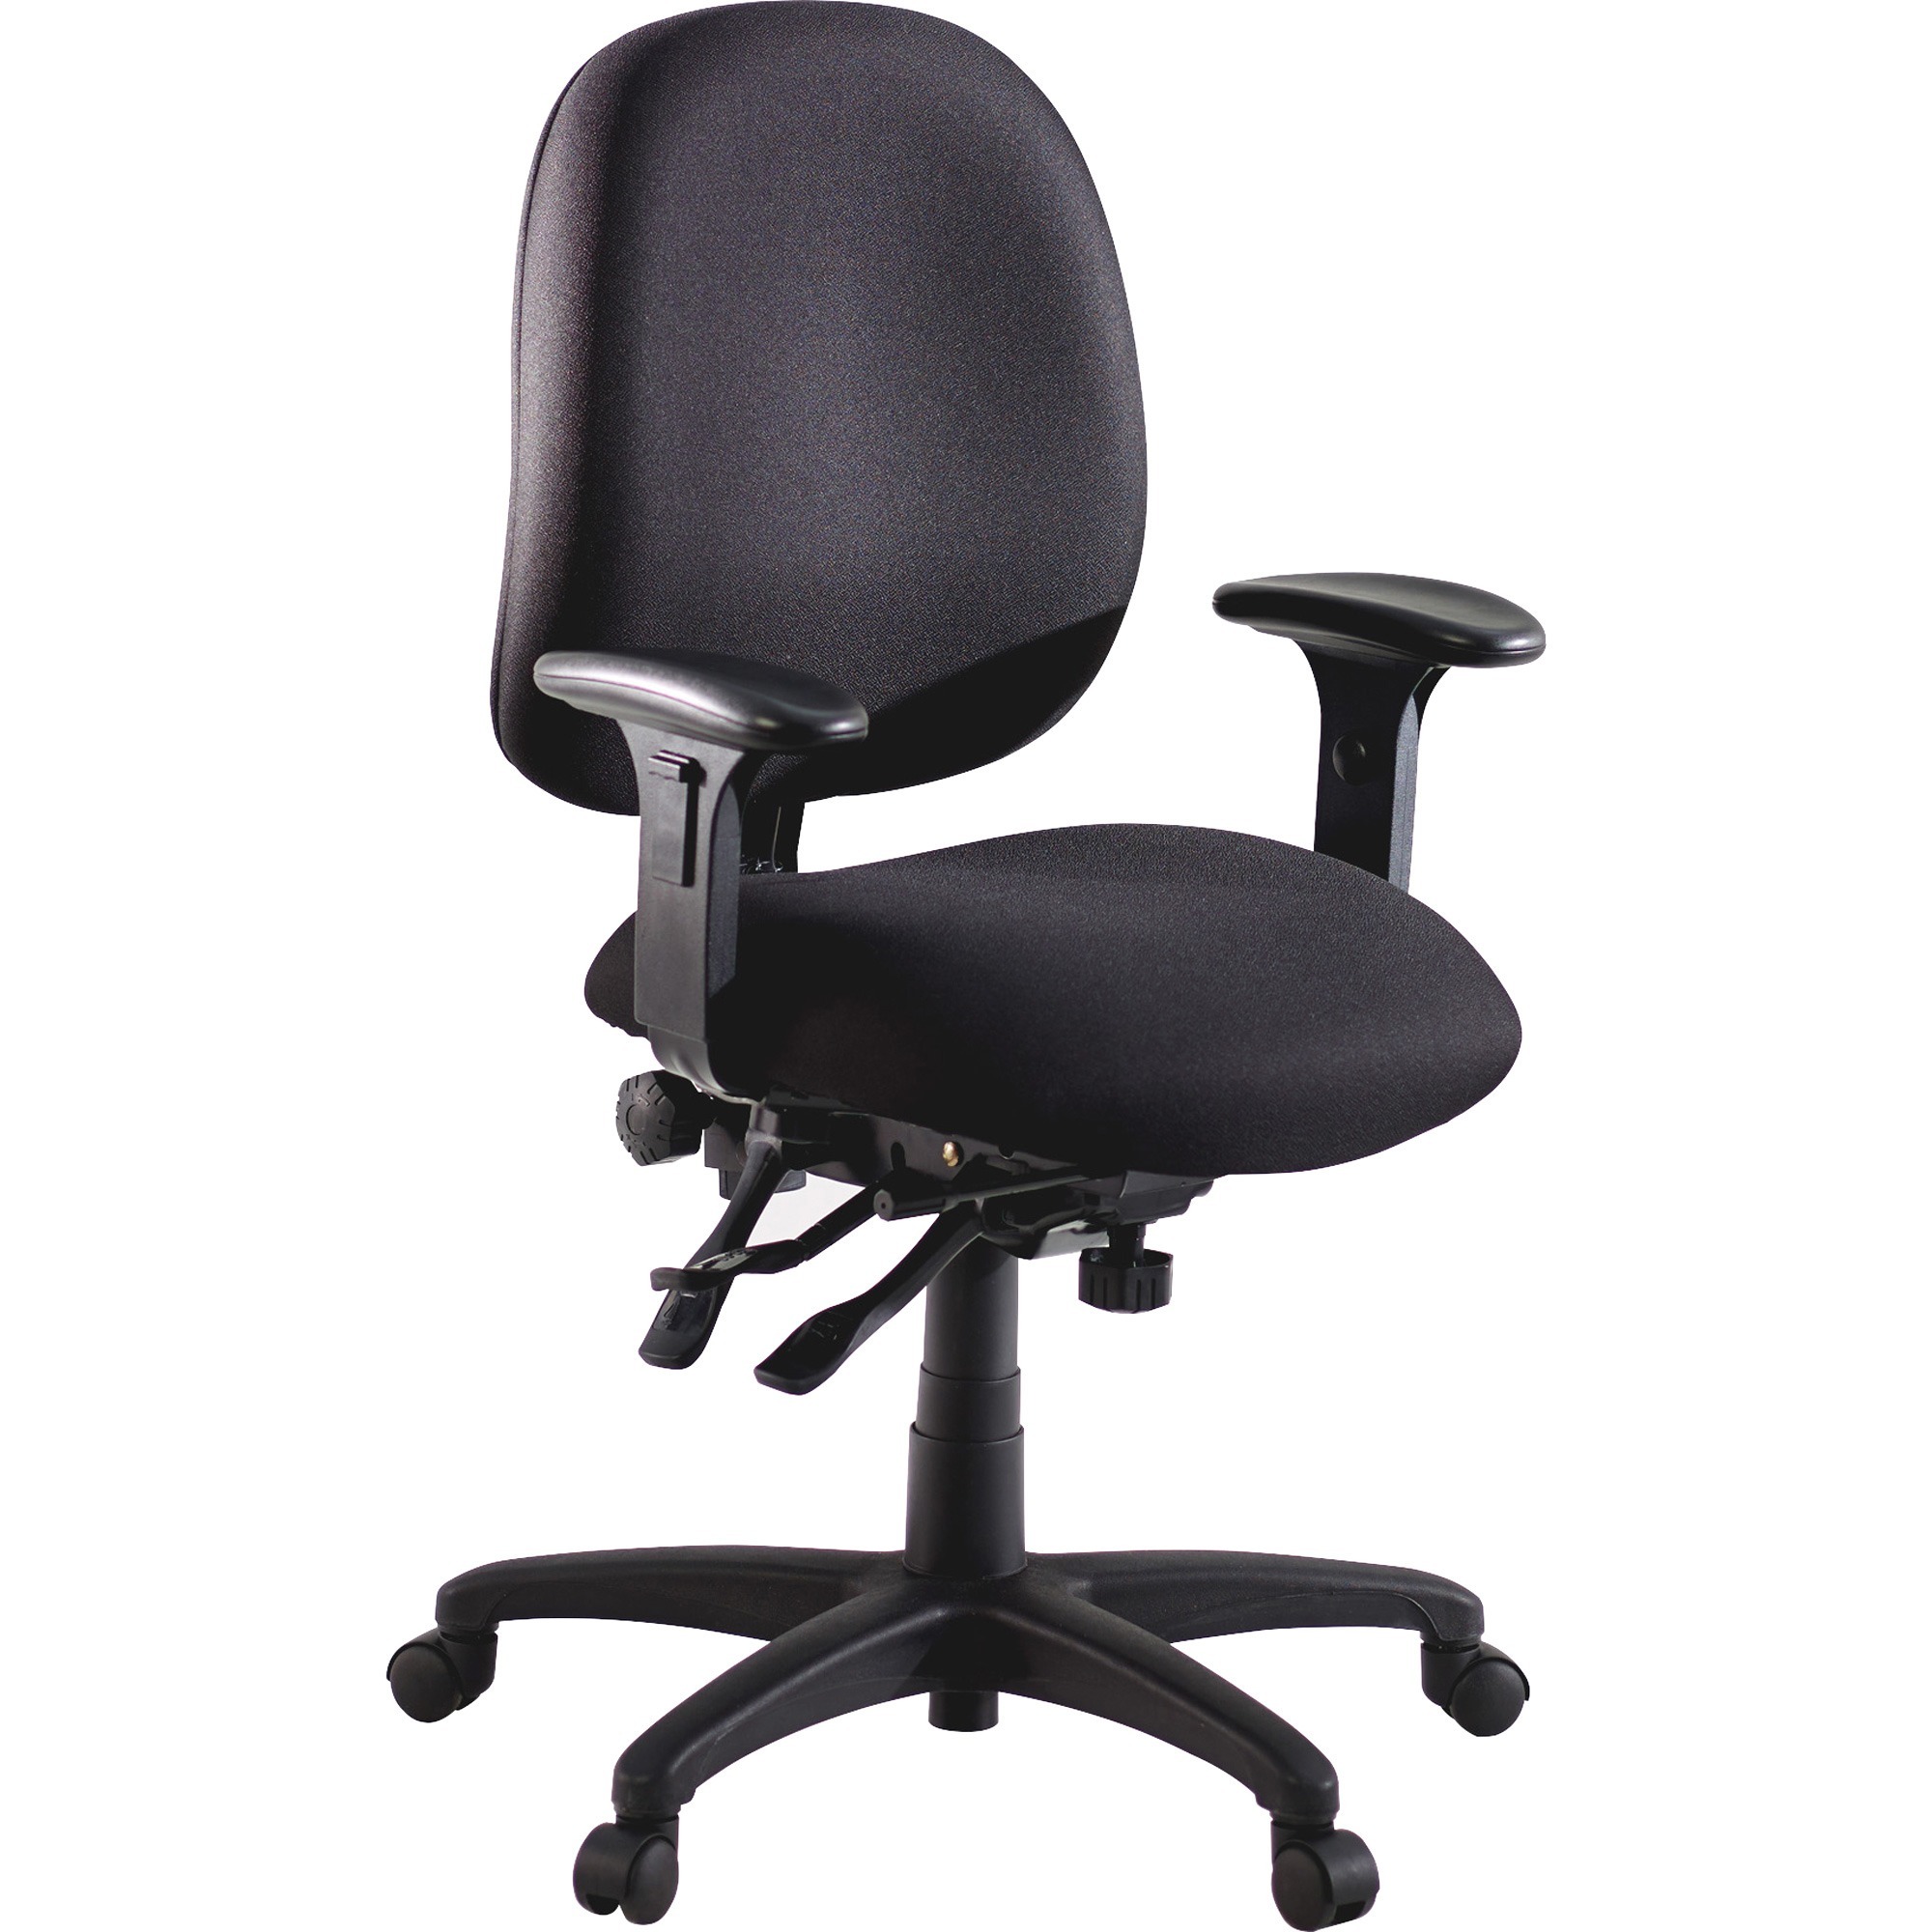 Lorell Contoured Back Task Chair 2.6 Height X 51.4 Width X 26.6 Length 